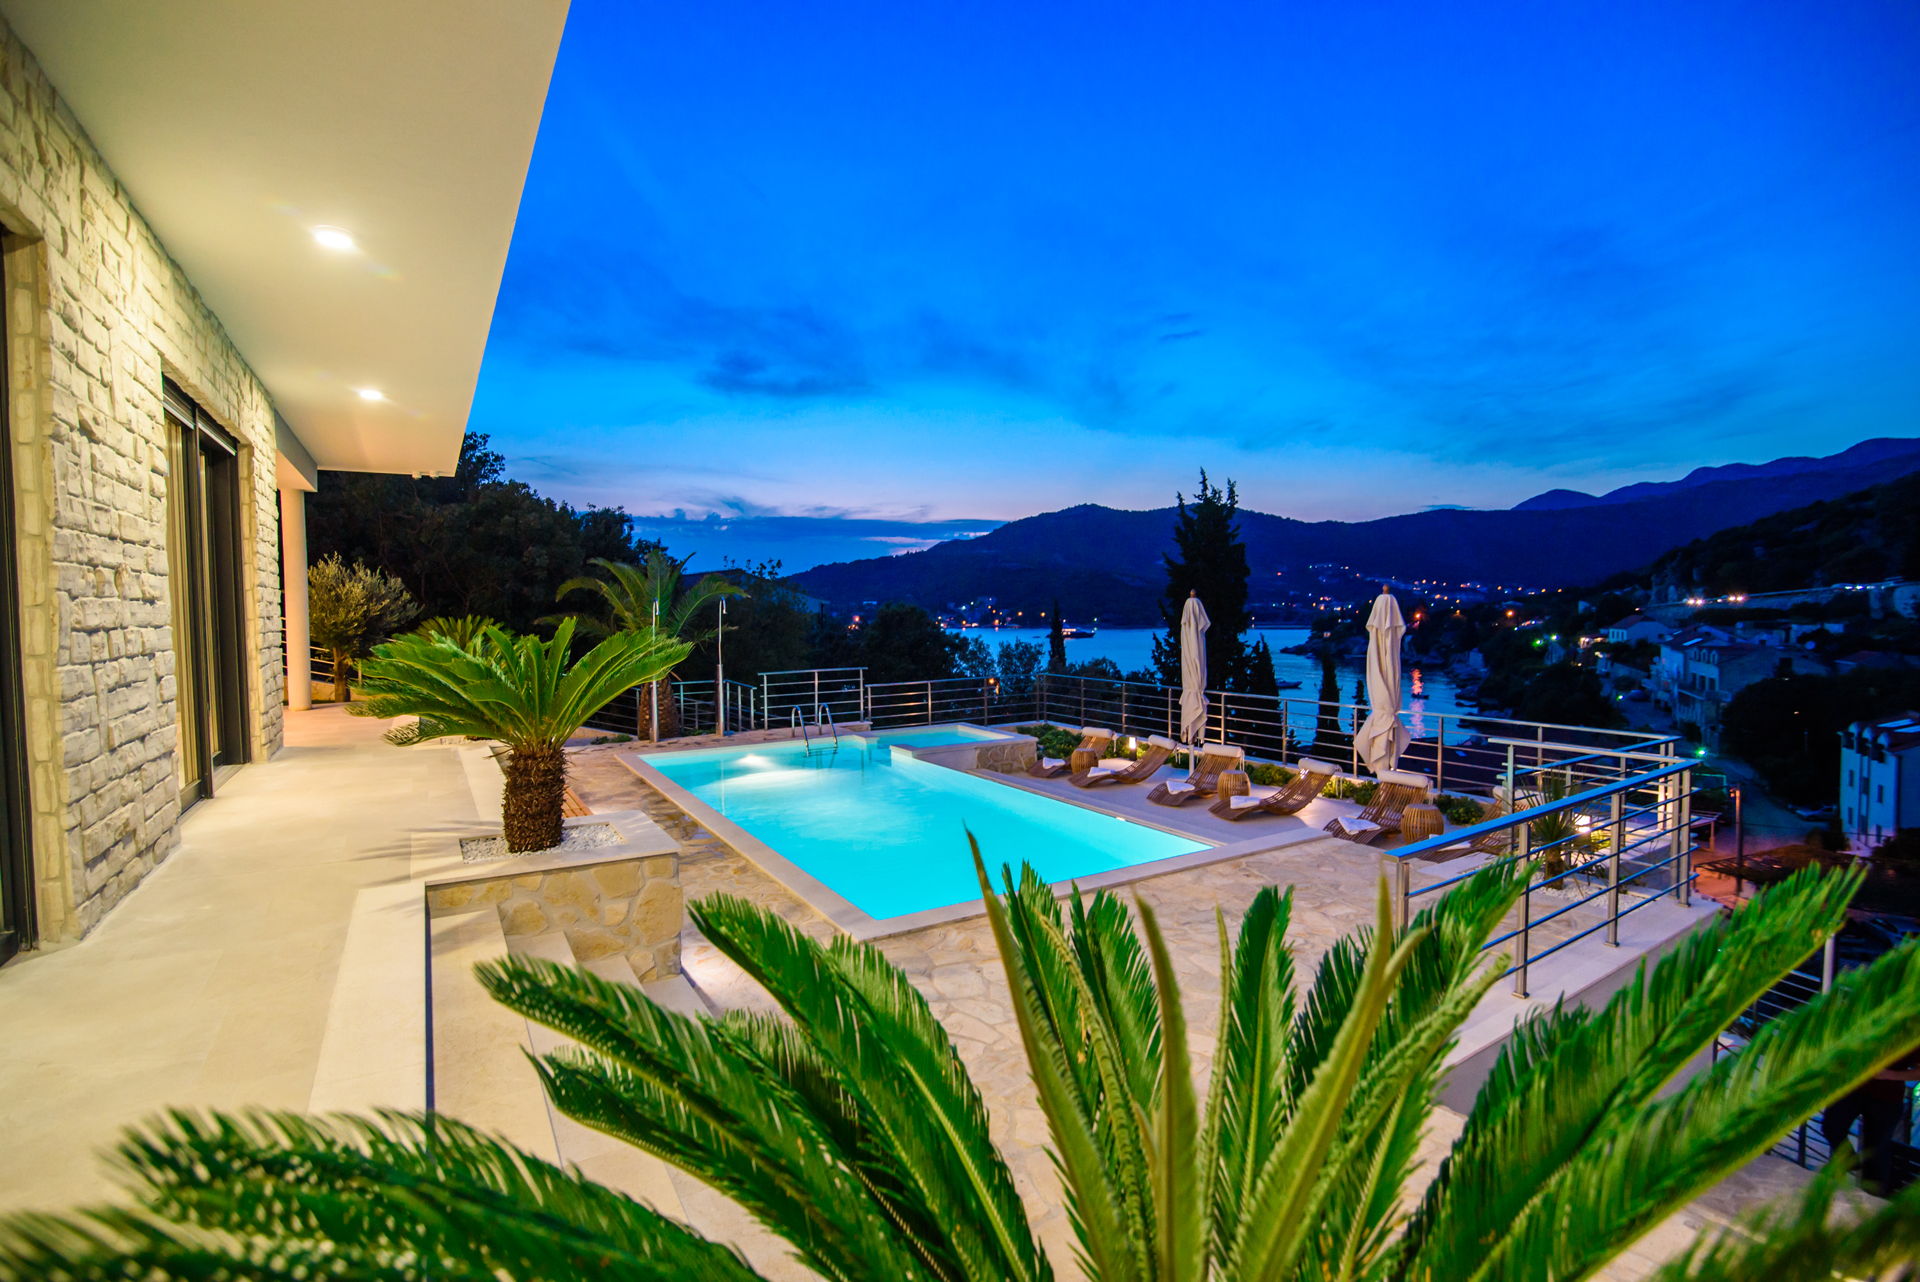 Panoramic view from the  pool terrace of Luxury Villa Neptune in Dubrovnik Riviera by night